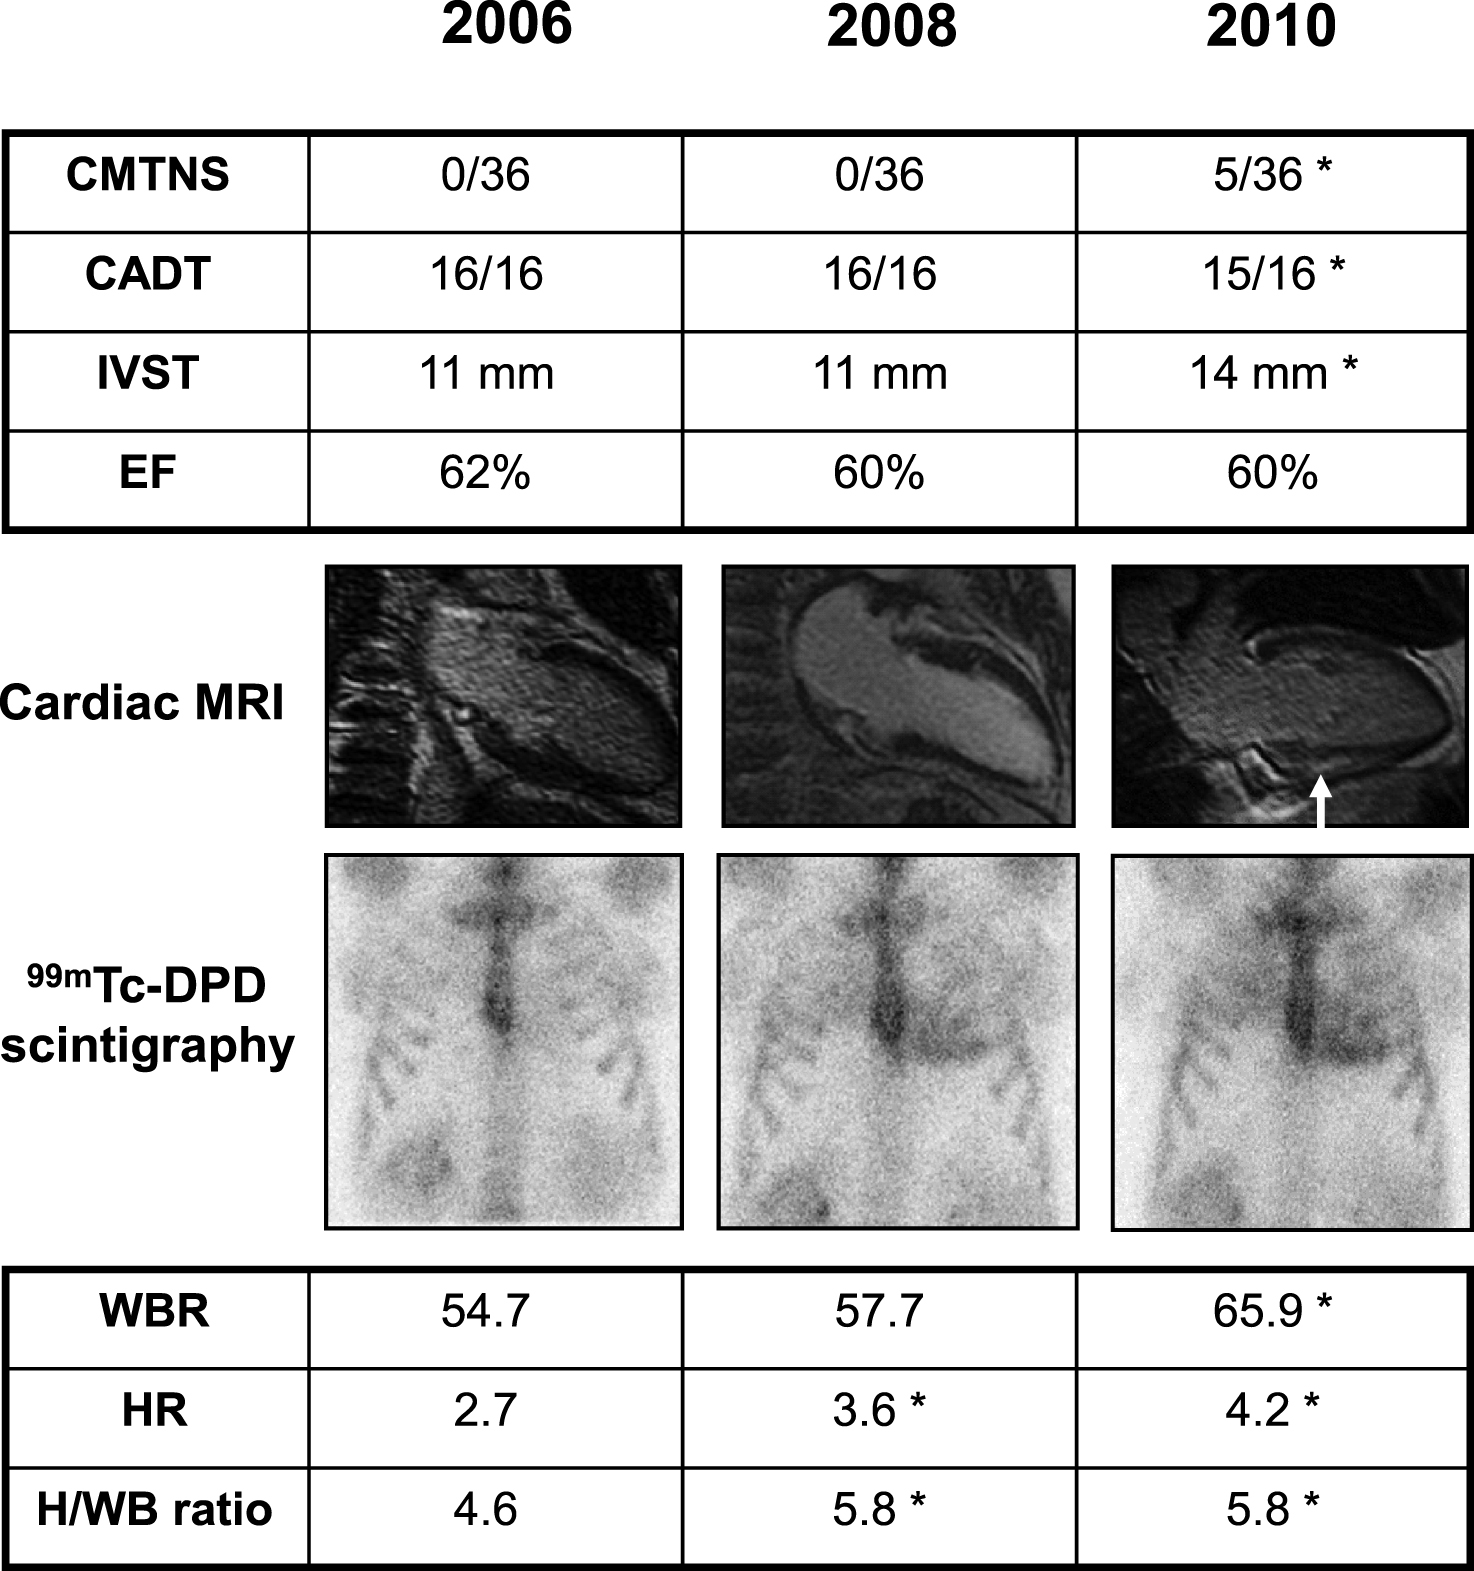 Clinical findings in an asymptomatic Glu89Gln carrier, showing higher sensitivity of 99mTc-DPD scintigraphy in detecting heart involvement. She was followed every two years with neurographic, autonomic and cardiological tests. Asterisk indicates a pathological result. At first control in 2006, at 46 years of age, Charcot-Marie-Tooth neuropathy score (CMTNS), compound autonomic dysfunction test (CADT), inter-ventricular septum thickness (IVST) and ejection fraction (EF) were normal; cardiac MRI and 99mTc-DPD scintigraphy were also normal; the latter showed no significant cardiac uptake (score 0) and normal indexes of semiquantitative analysis (HR, WBR, H/WB ratio; see Materials and Methods). In 2008, CMTNS, CADT, IVST, EF and cardiac MRI were still normal. On the contrary, 99mTc-DPD scan showed a mild cardiac uptake (score 1) confirmed by some pathological semiquantitative indexes. After two years, in 2010, there was a mild peripheral and autonomic nerve involvement at CMTNS and CADT, IVST was increased, cardiac MRI showed a minimal signal hyperintensity (arrow), and scintigraphy worsened to score 2.